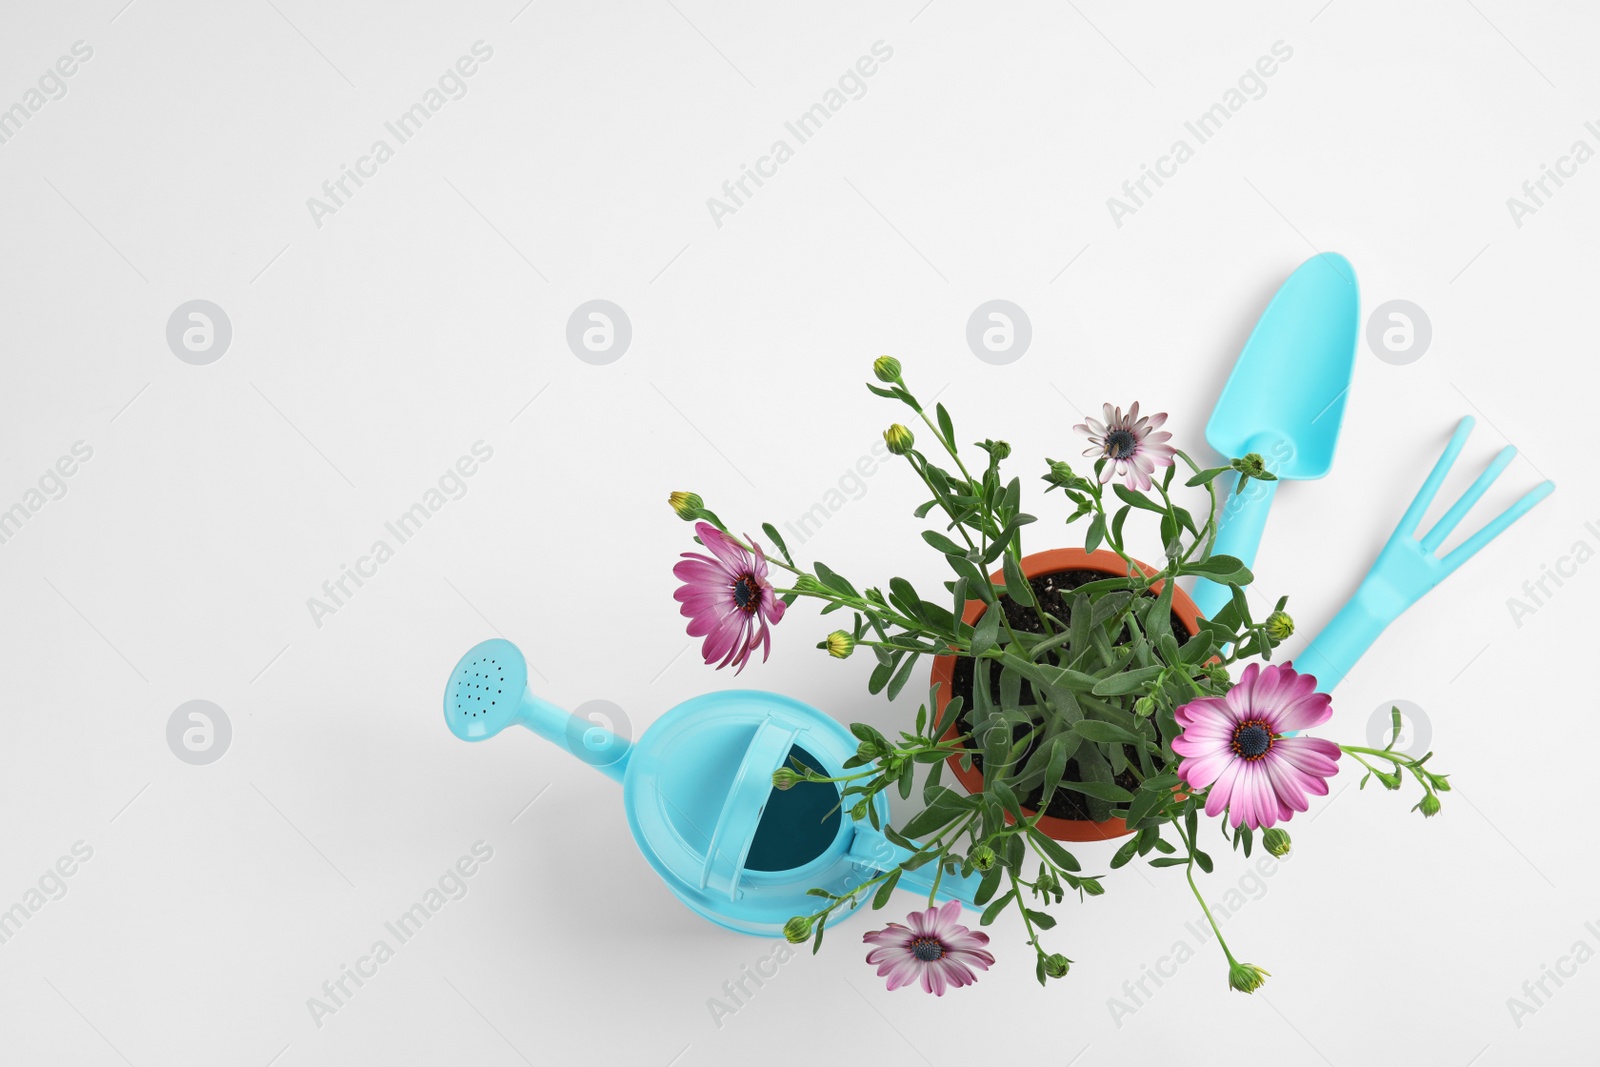 Photo of Blooming flowers and gardening equipment on white background, top view